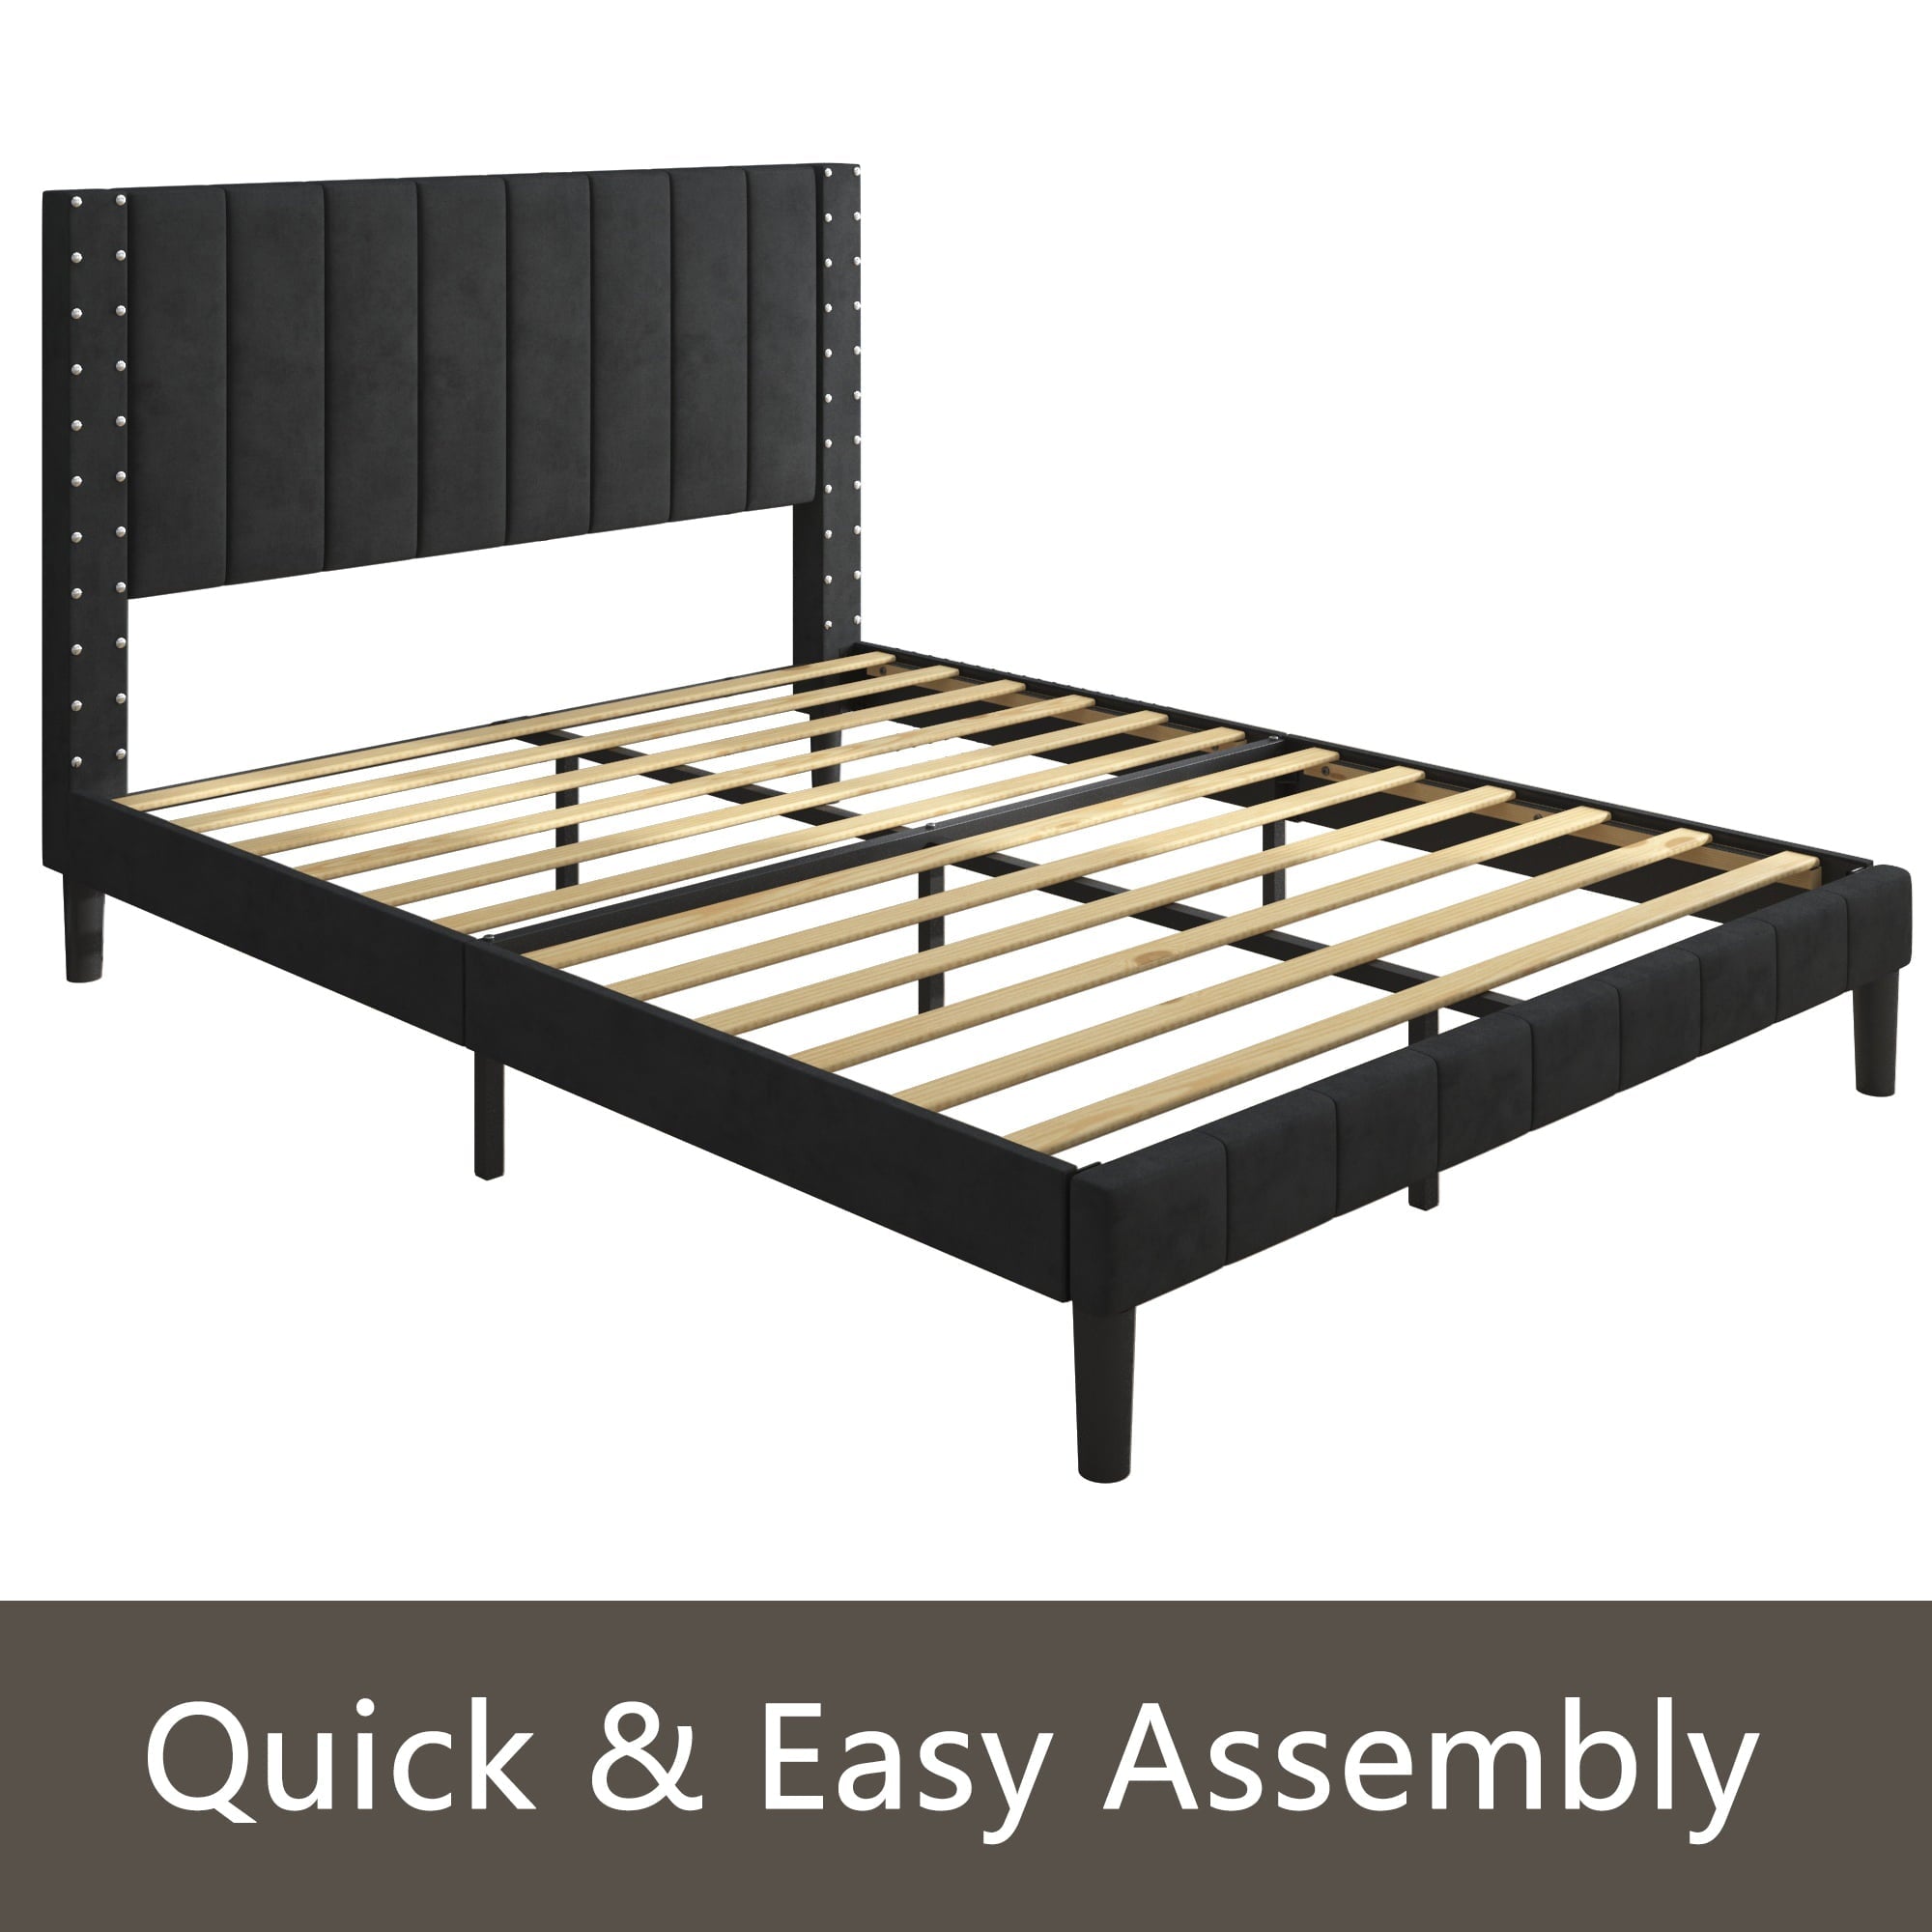 Black Queen Bed Frame for Adults Kids, Modern Fabric Upholstered Platform Bed Frame with Headboard, Queen Size Bed Frame Bedroom Furniture with Wood Slats Support, No Box Spring Needed